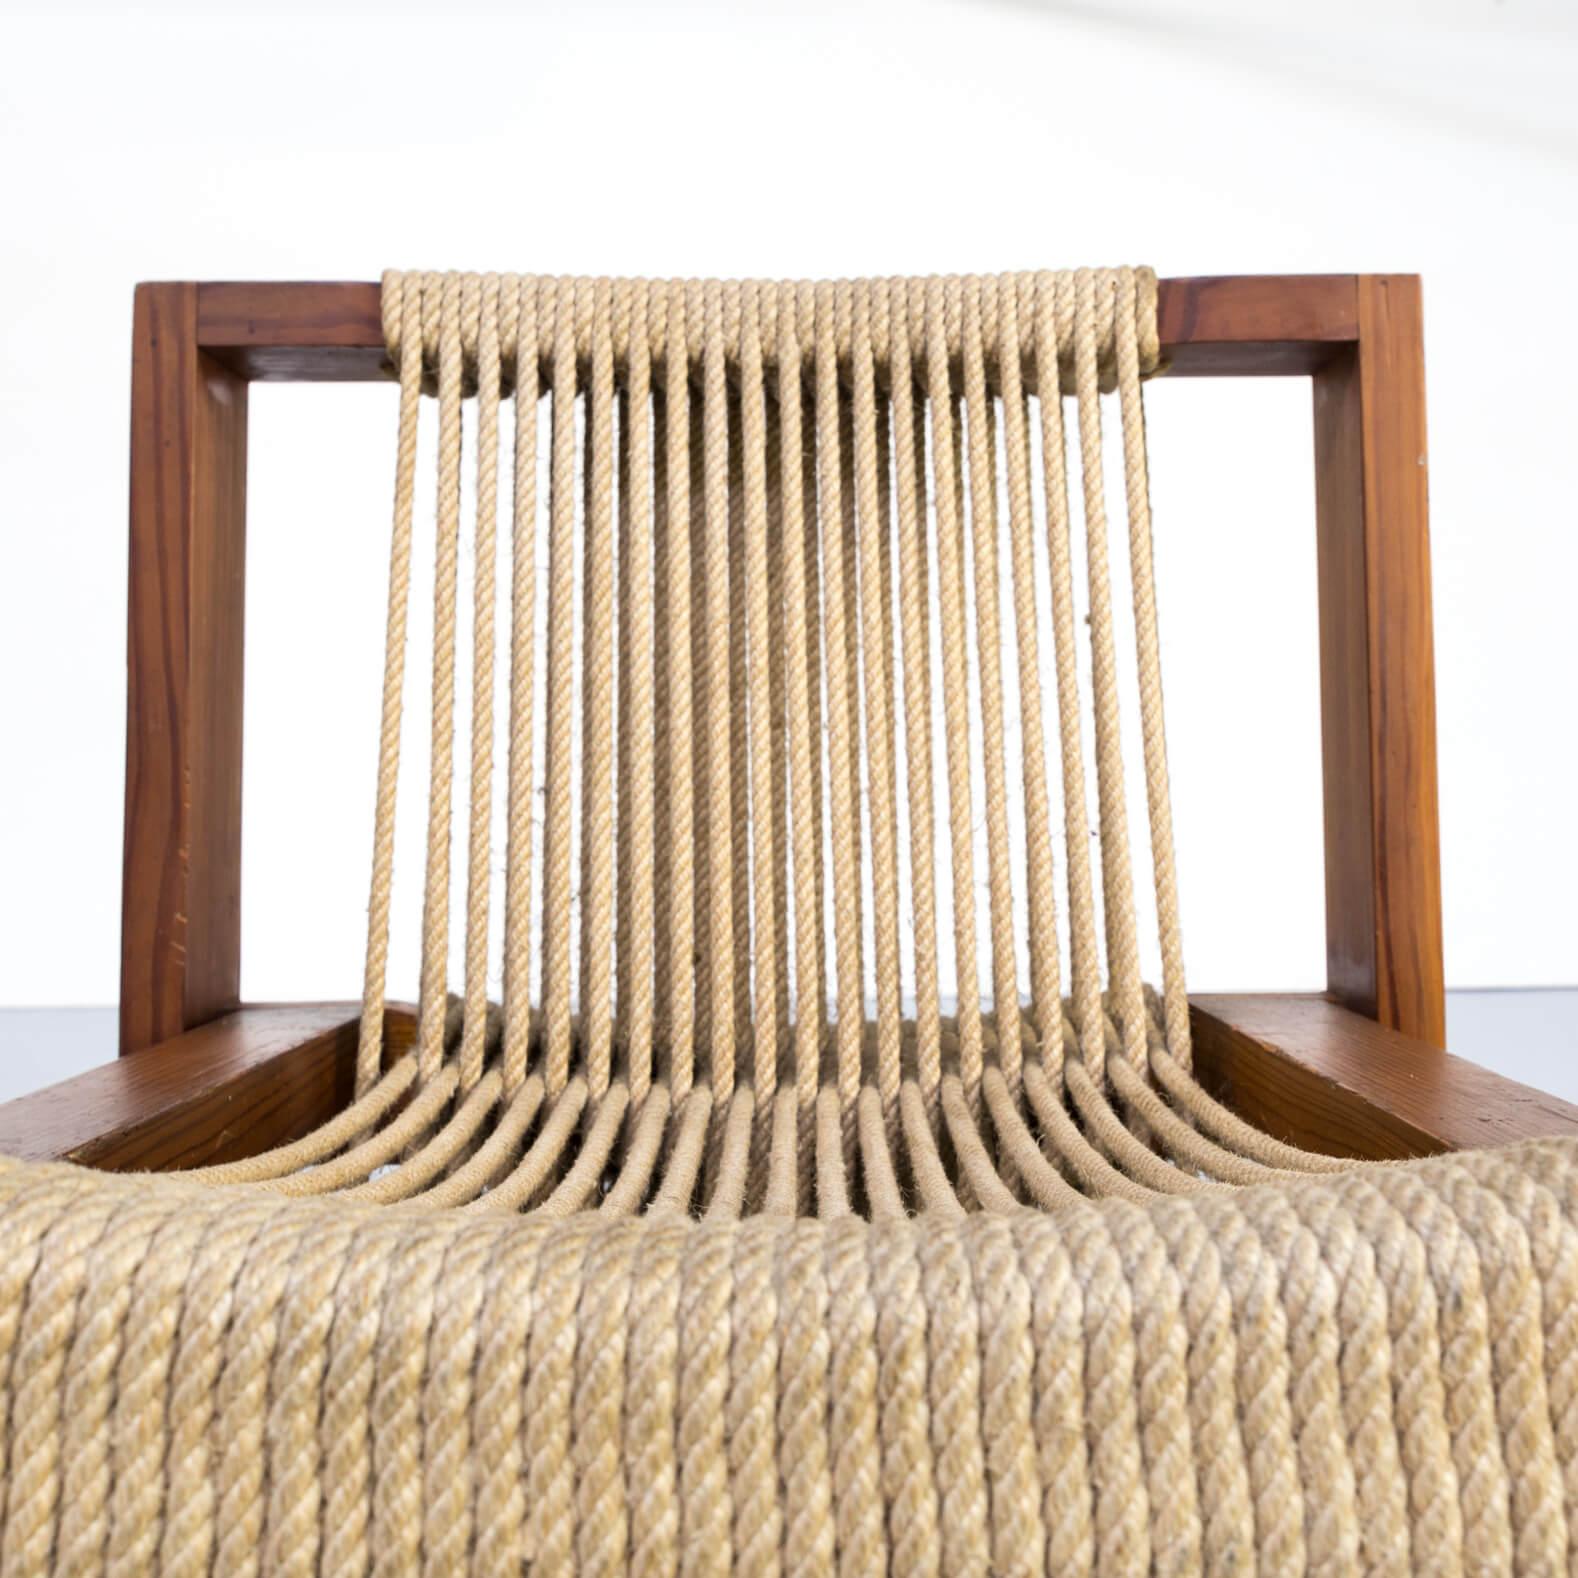 1950s Rope Chair in Pine Wood For Sale 6